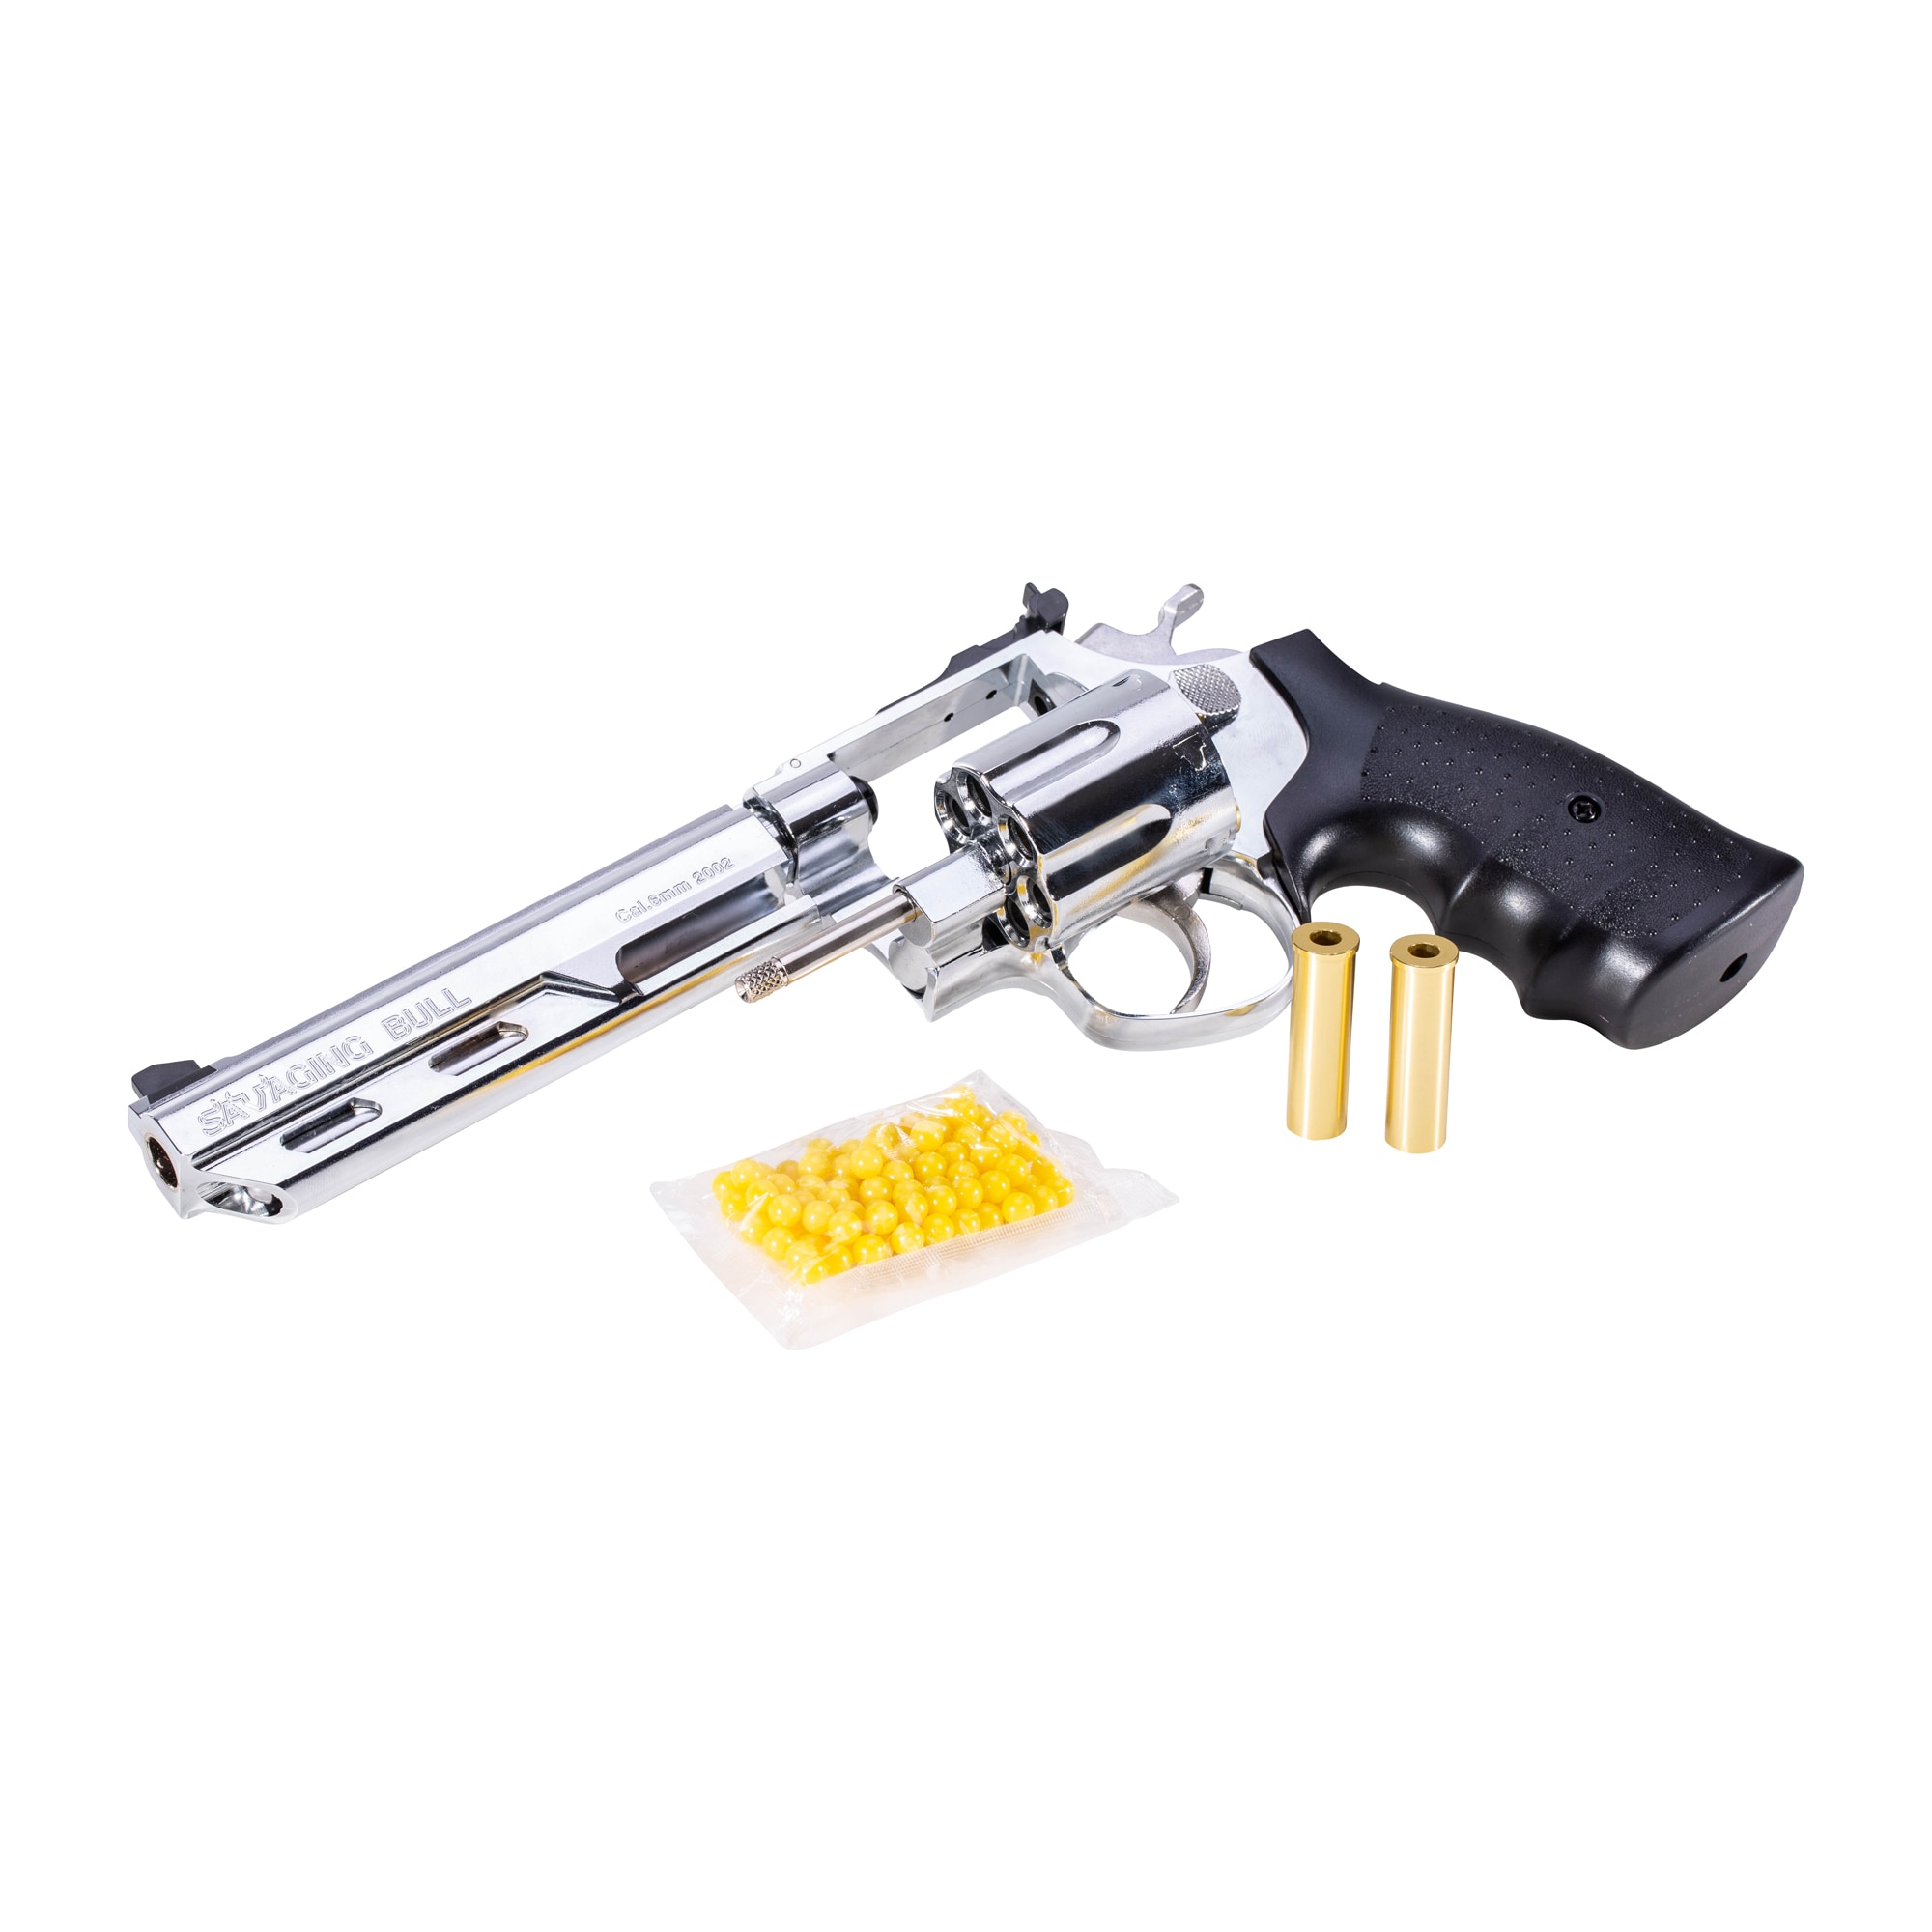 HFC Savaging Bull 6 Revolver Gas Airsoft Pistol ( Silver )